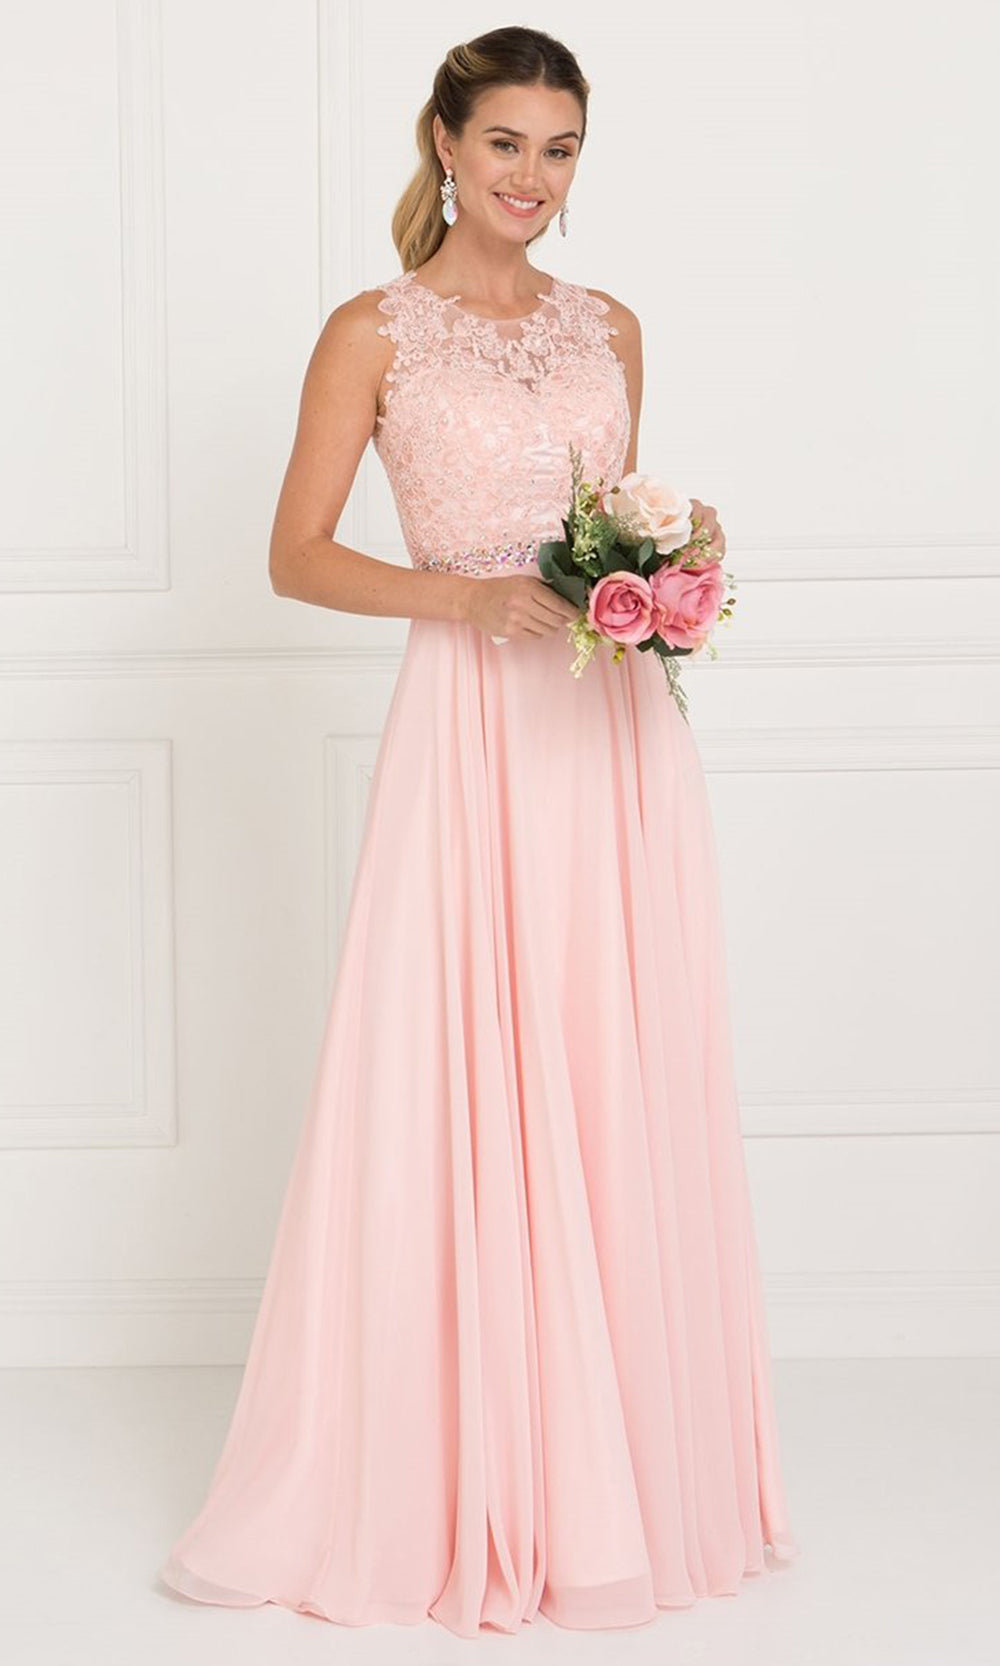 Elizabeth K - Illusion Jewel Embellished Lace A-Line Gown GL2417 - 1 pc Blush In Size 2XL Available CCSALE 2XL / Blush